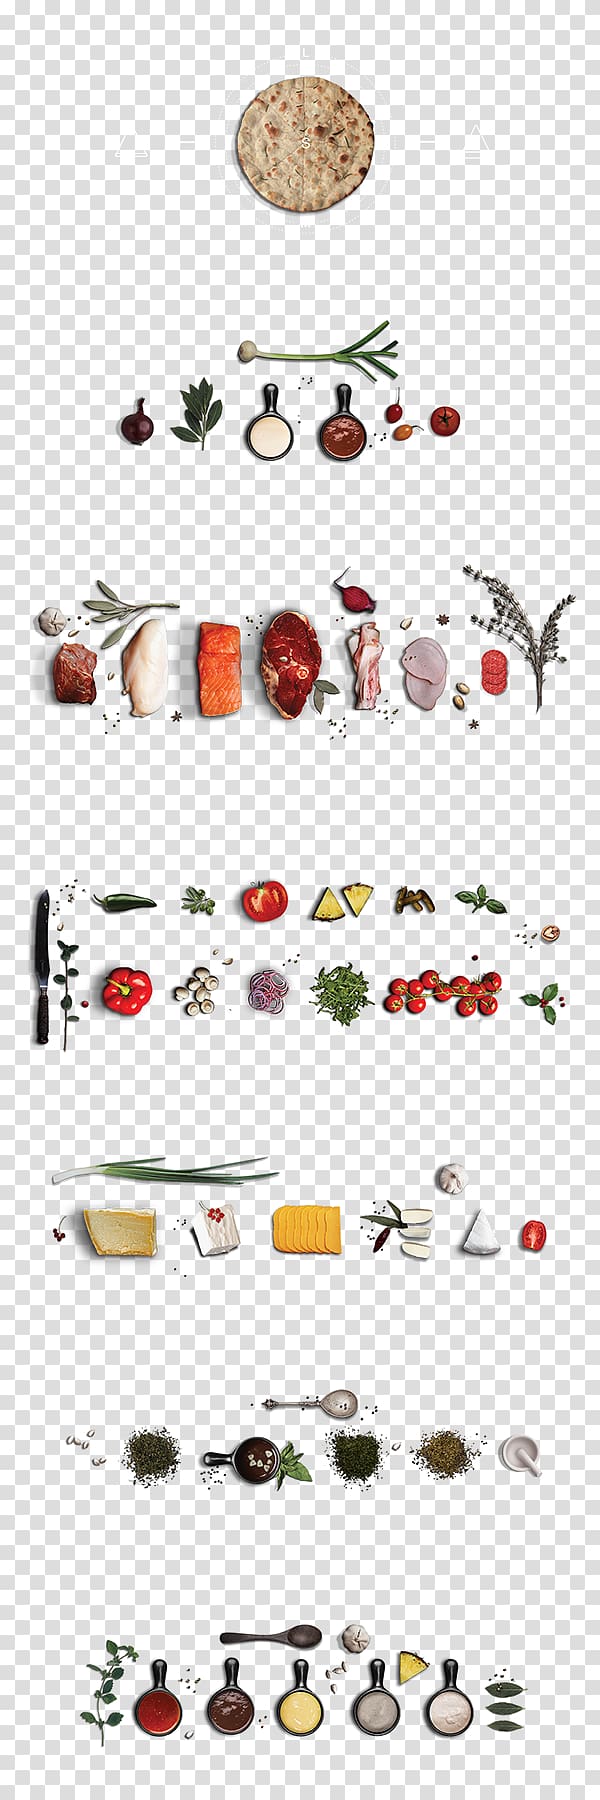 assorted vegetables illustration, Breakfast Food Condiment Hot pot Ingredient, Breakfast Buffet various spices fabrics transparent background PNG clipart